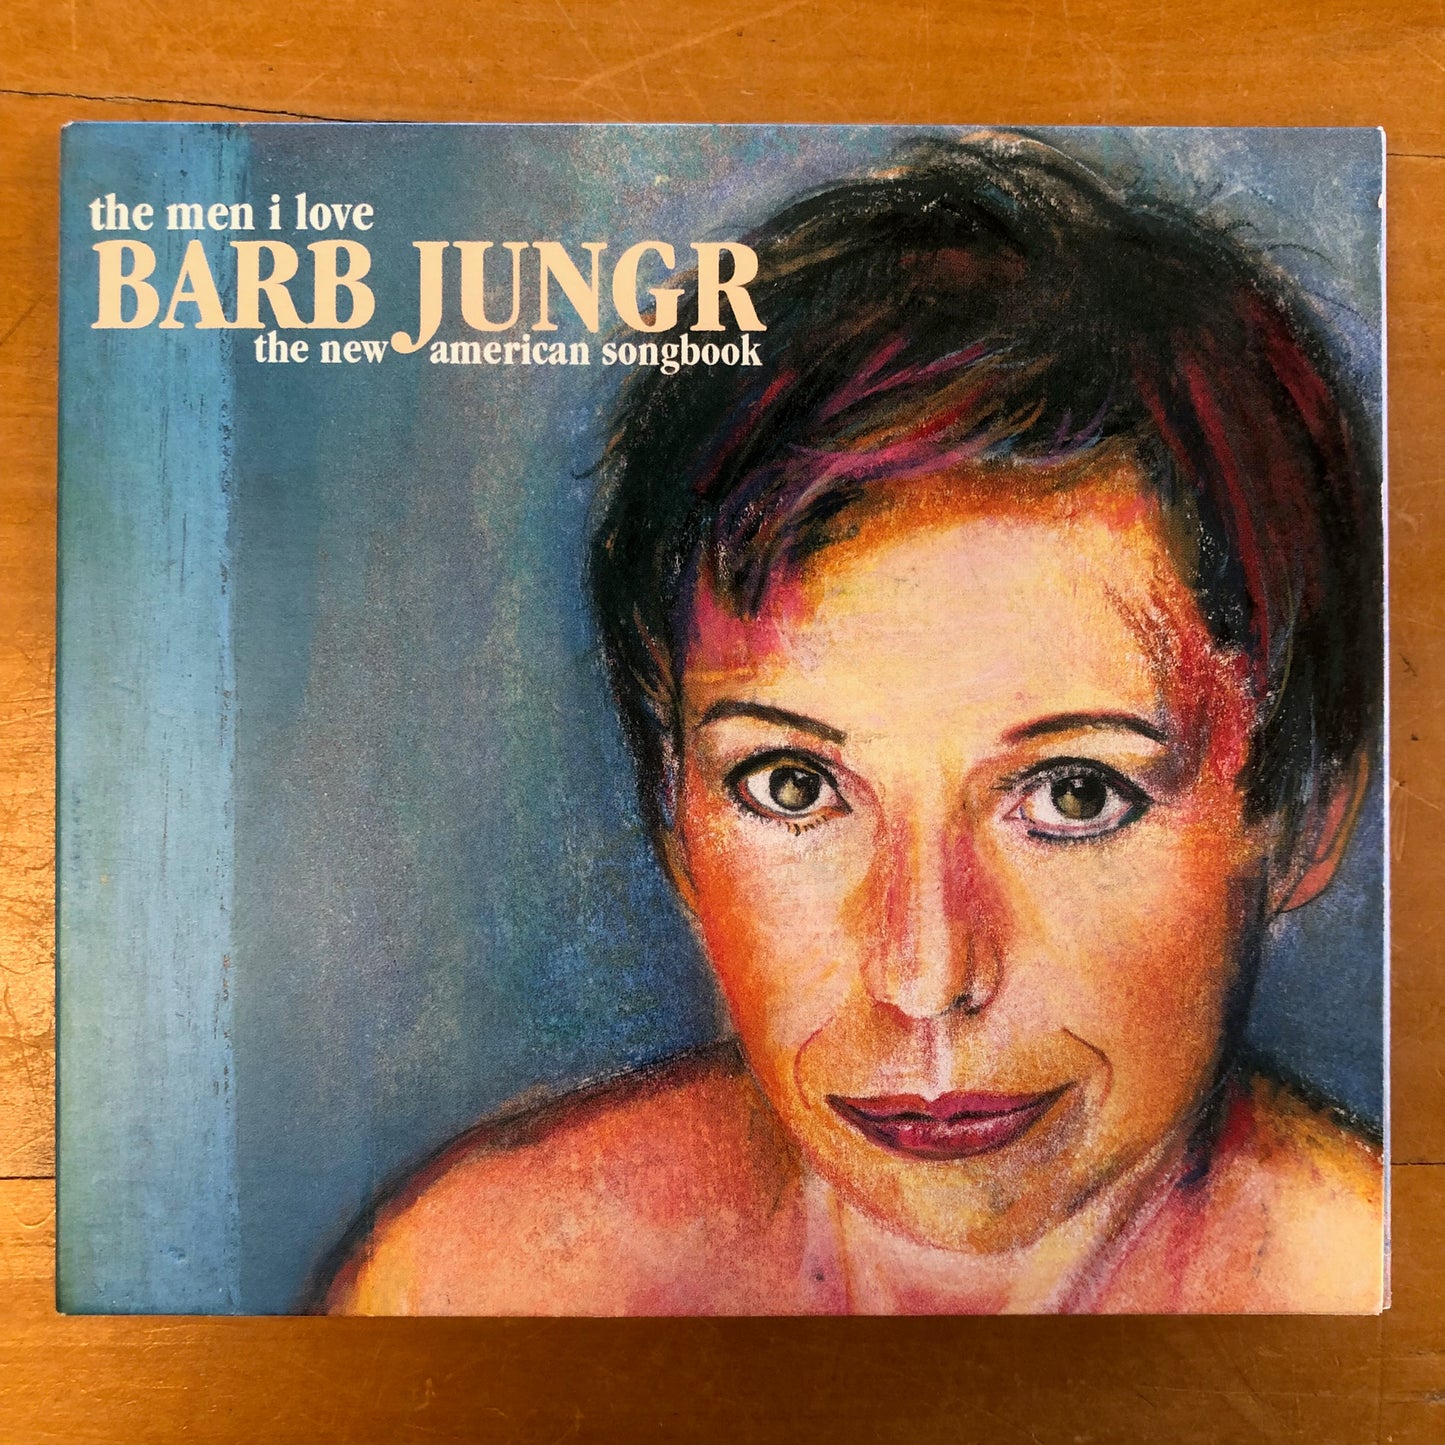 Barb Jungr - The Men I Love (The New American Songbook) (CD)